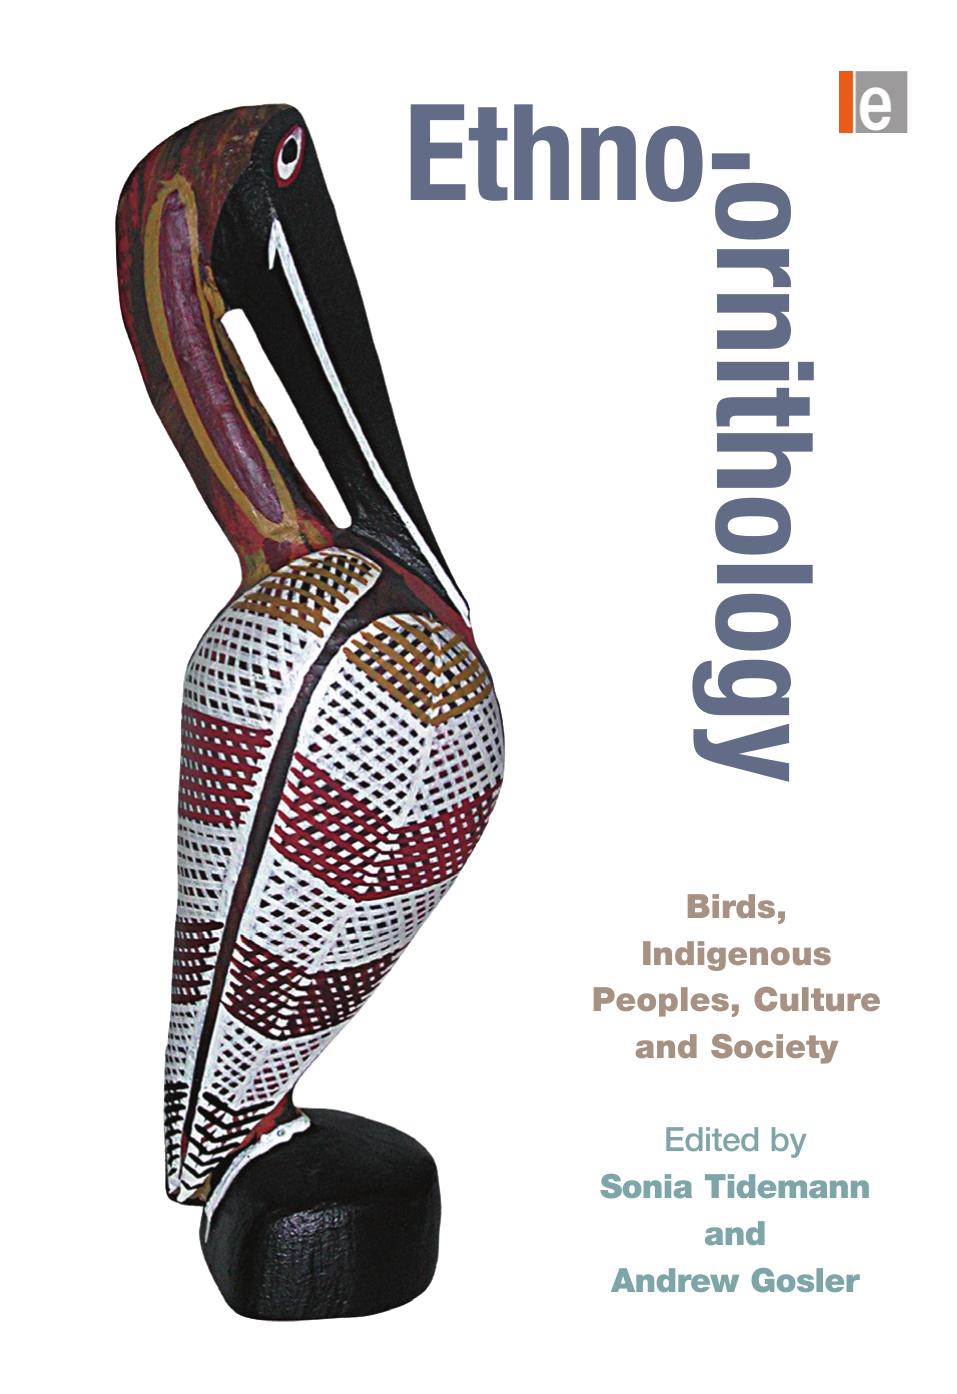 Ethno-Ornithology: Birds and Indigenous Peoples, Culture and Society